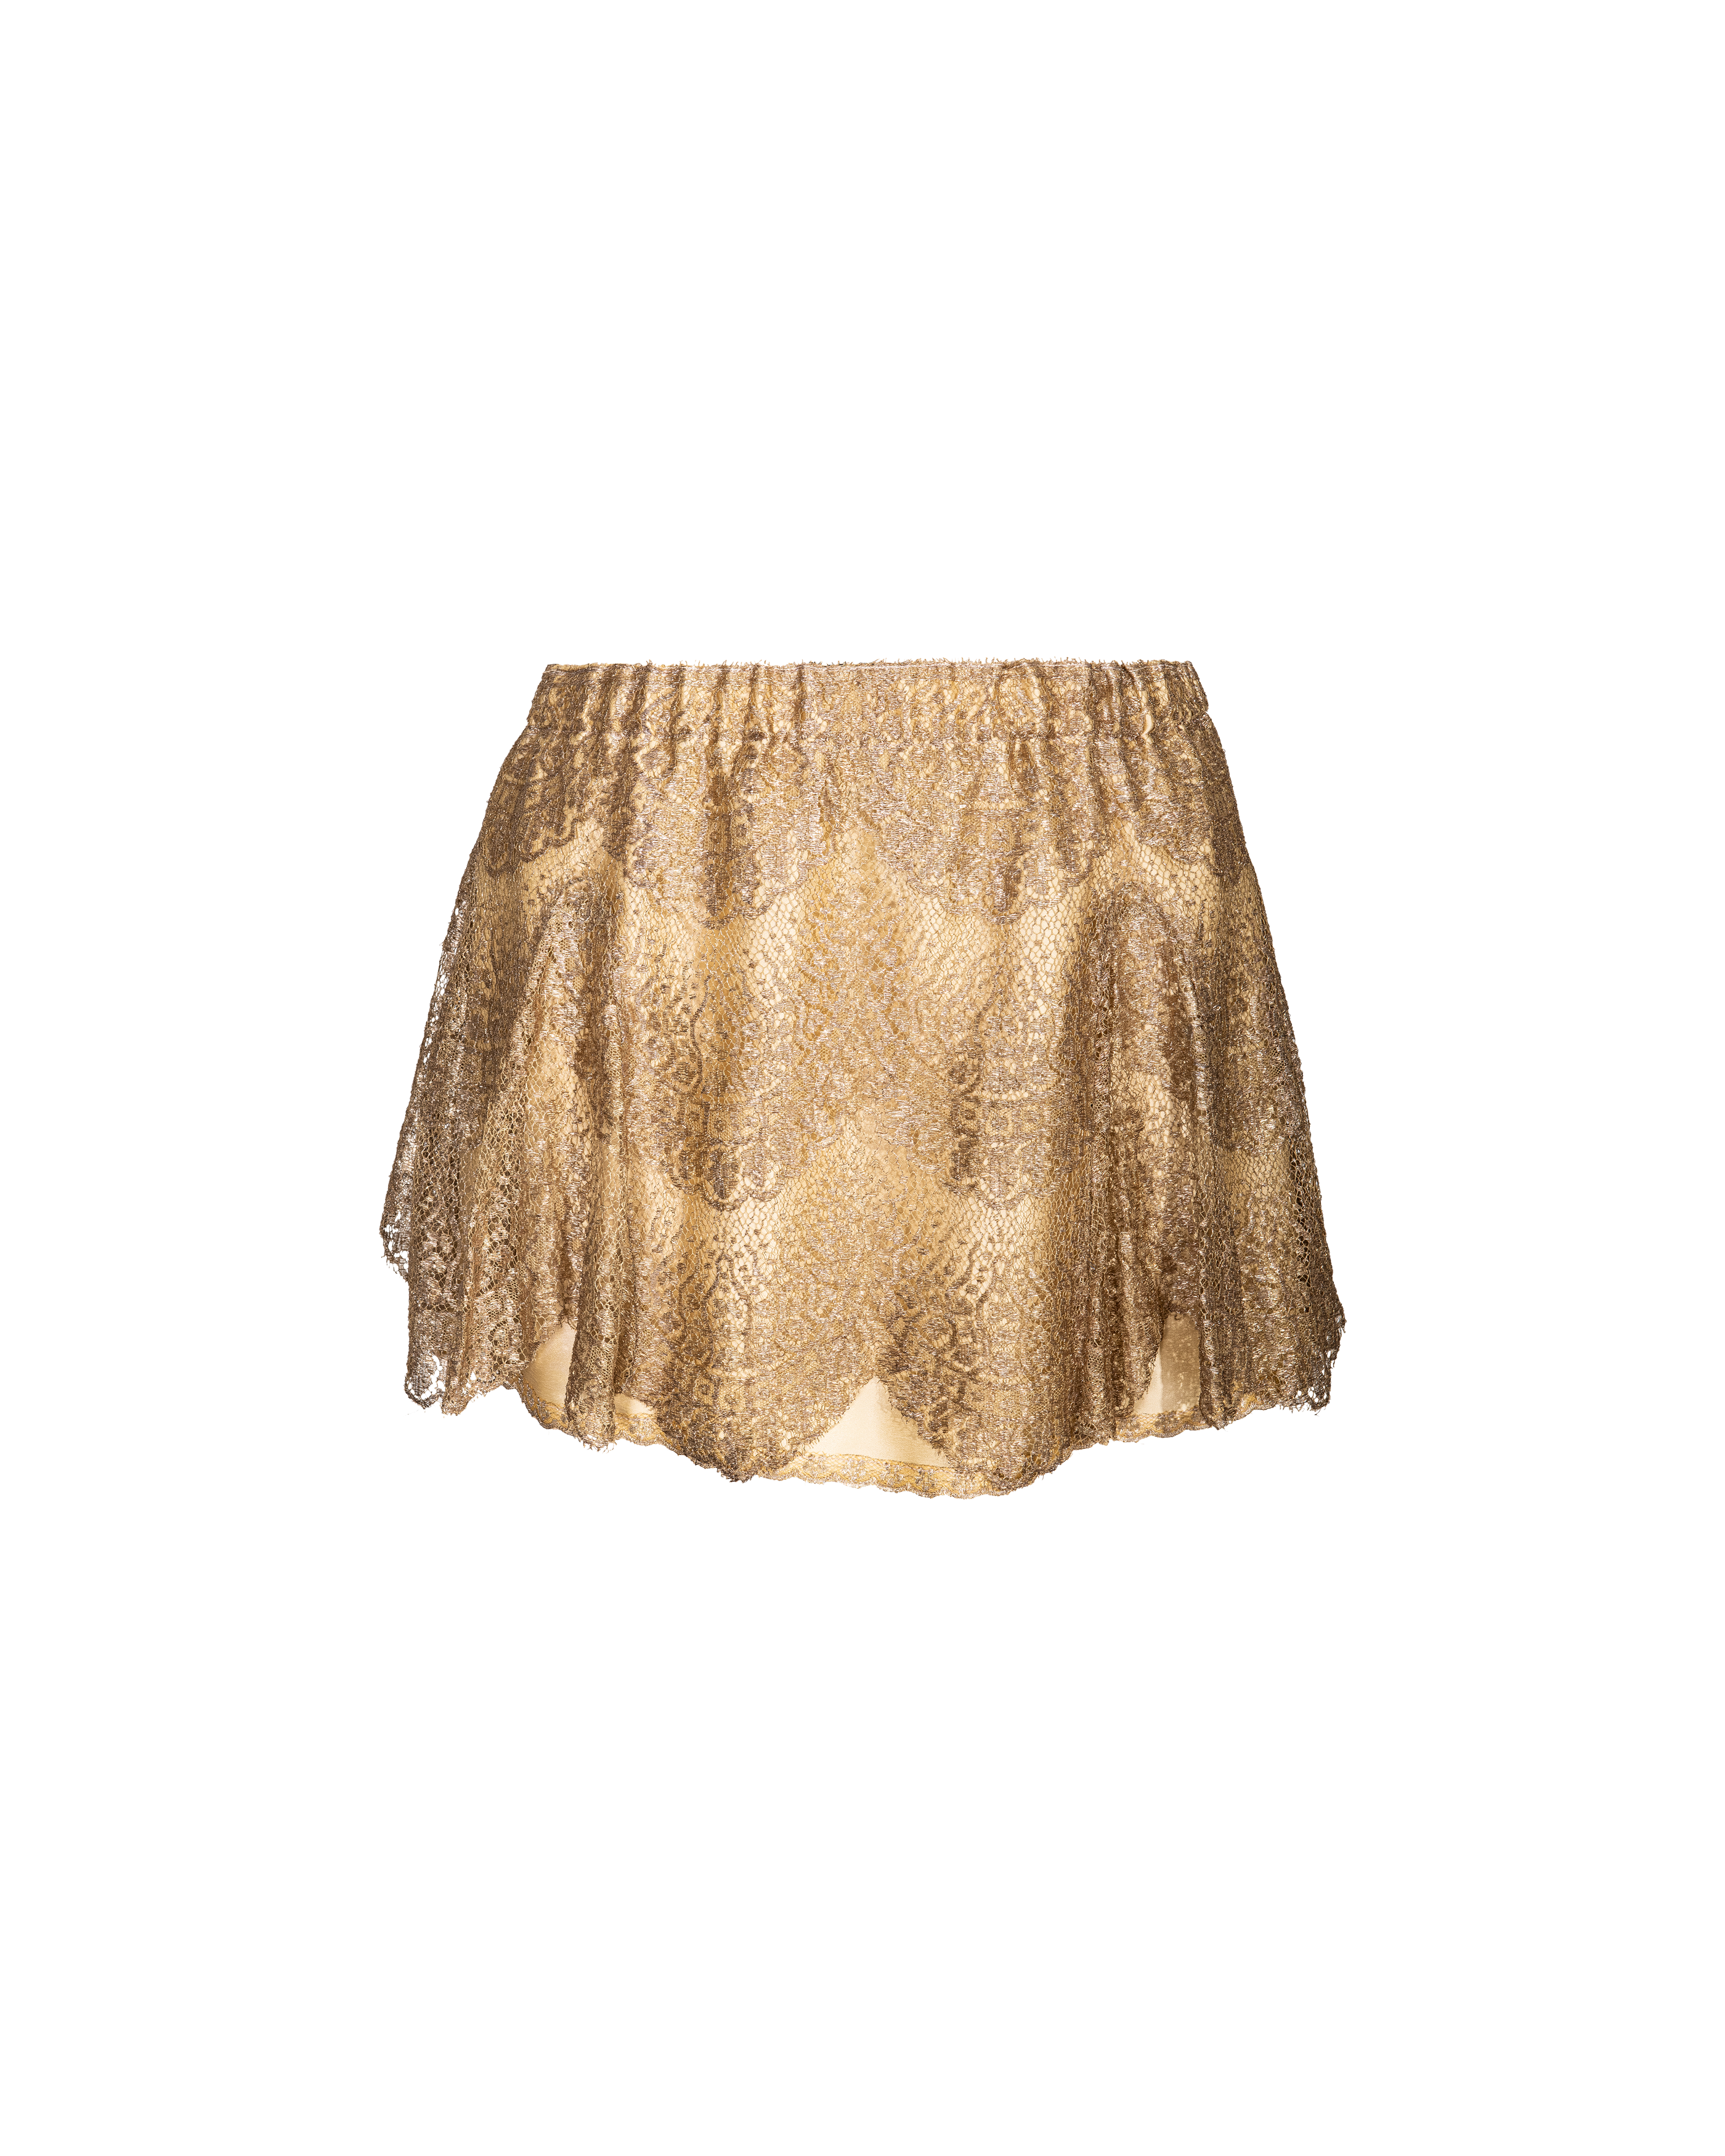 c. 1926 Re-worked Gold Lamé Mini Skirt